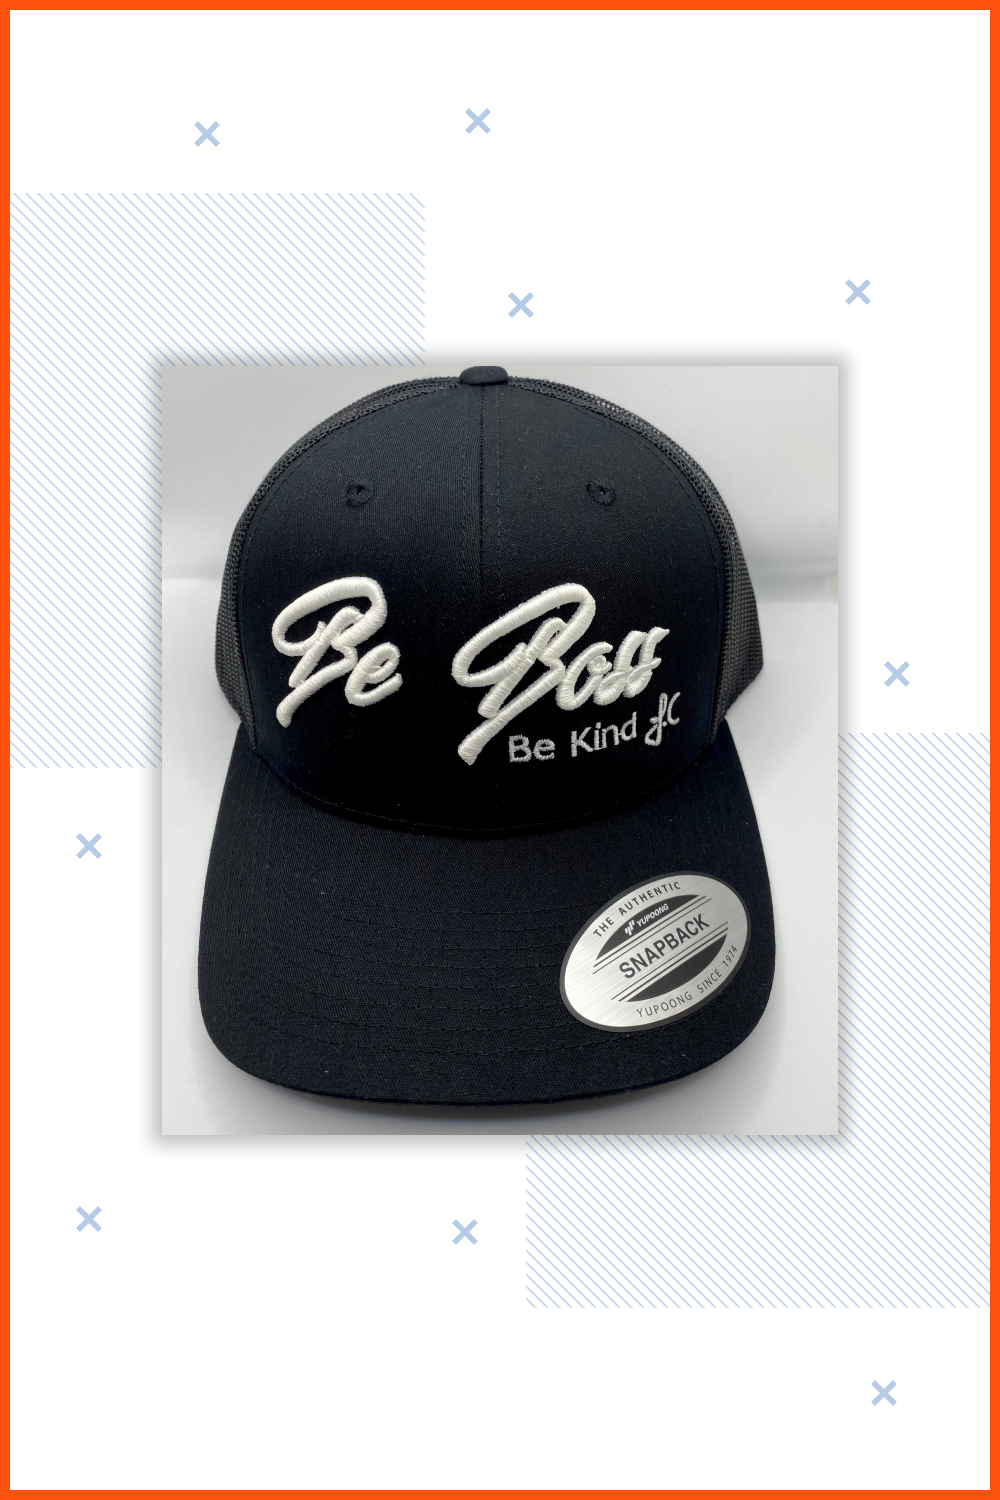 Black hat with sign 'Be Boss'.